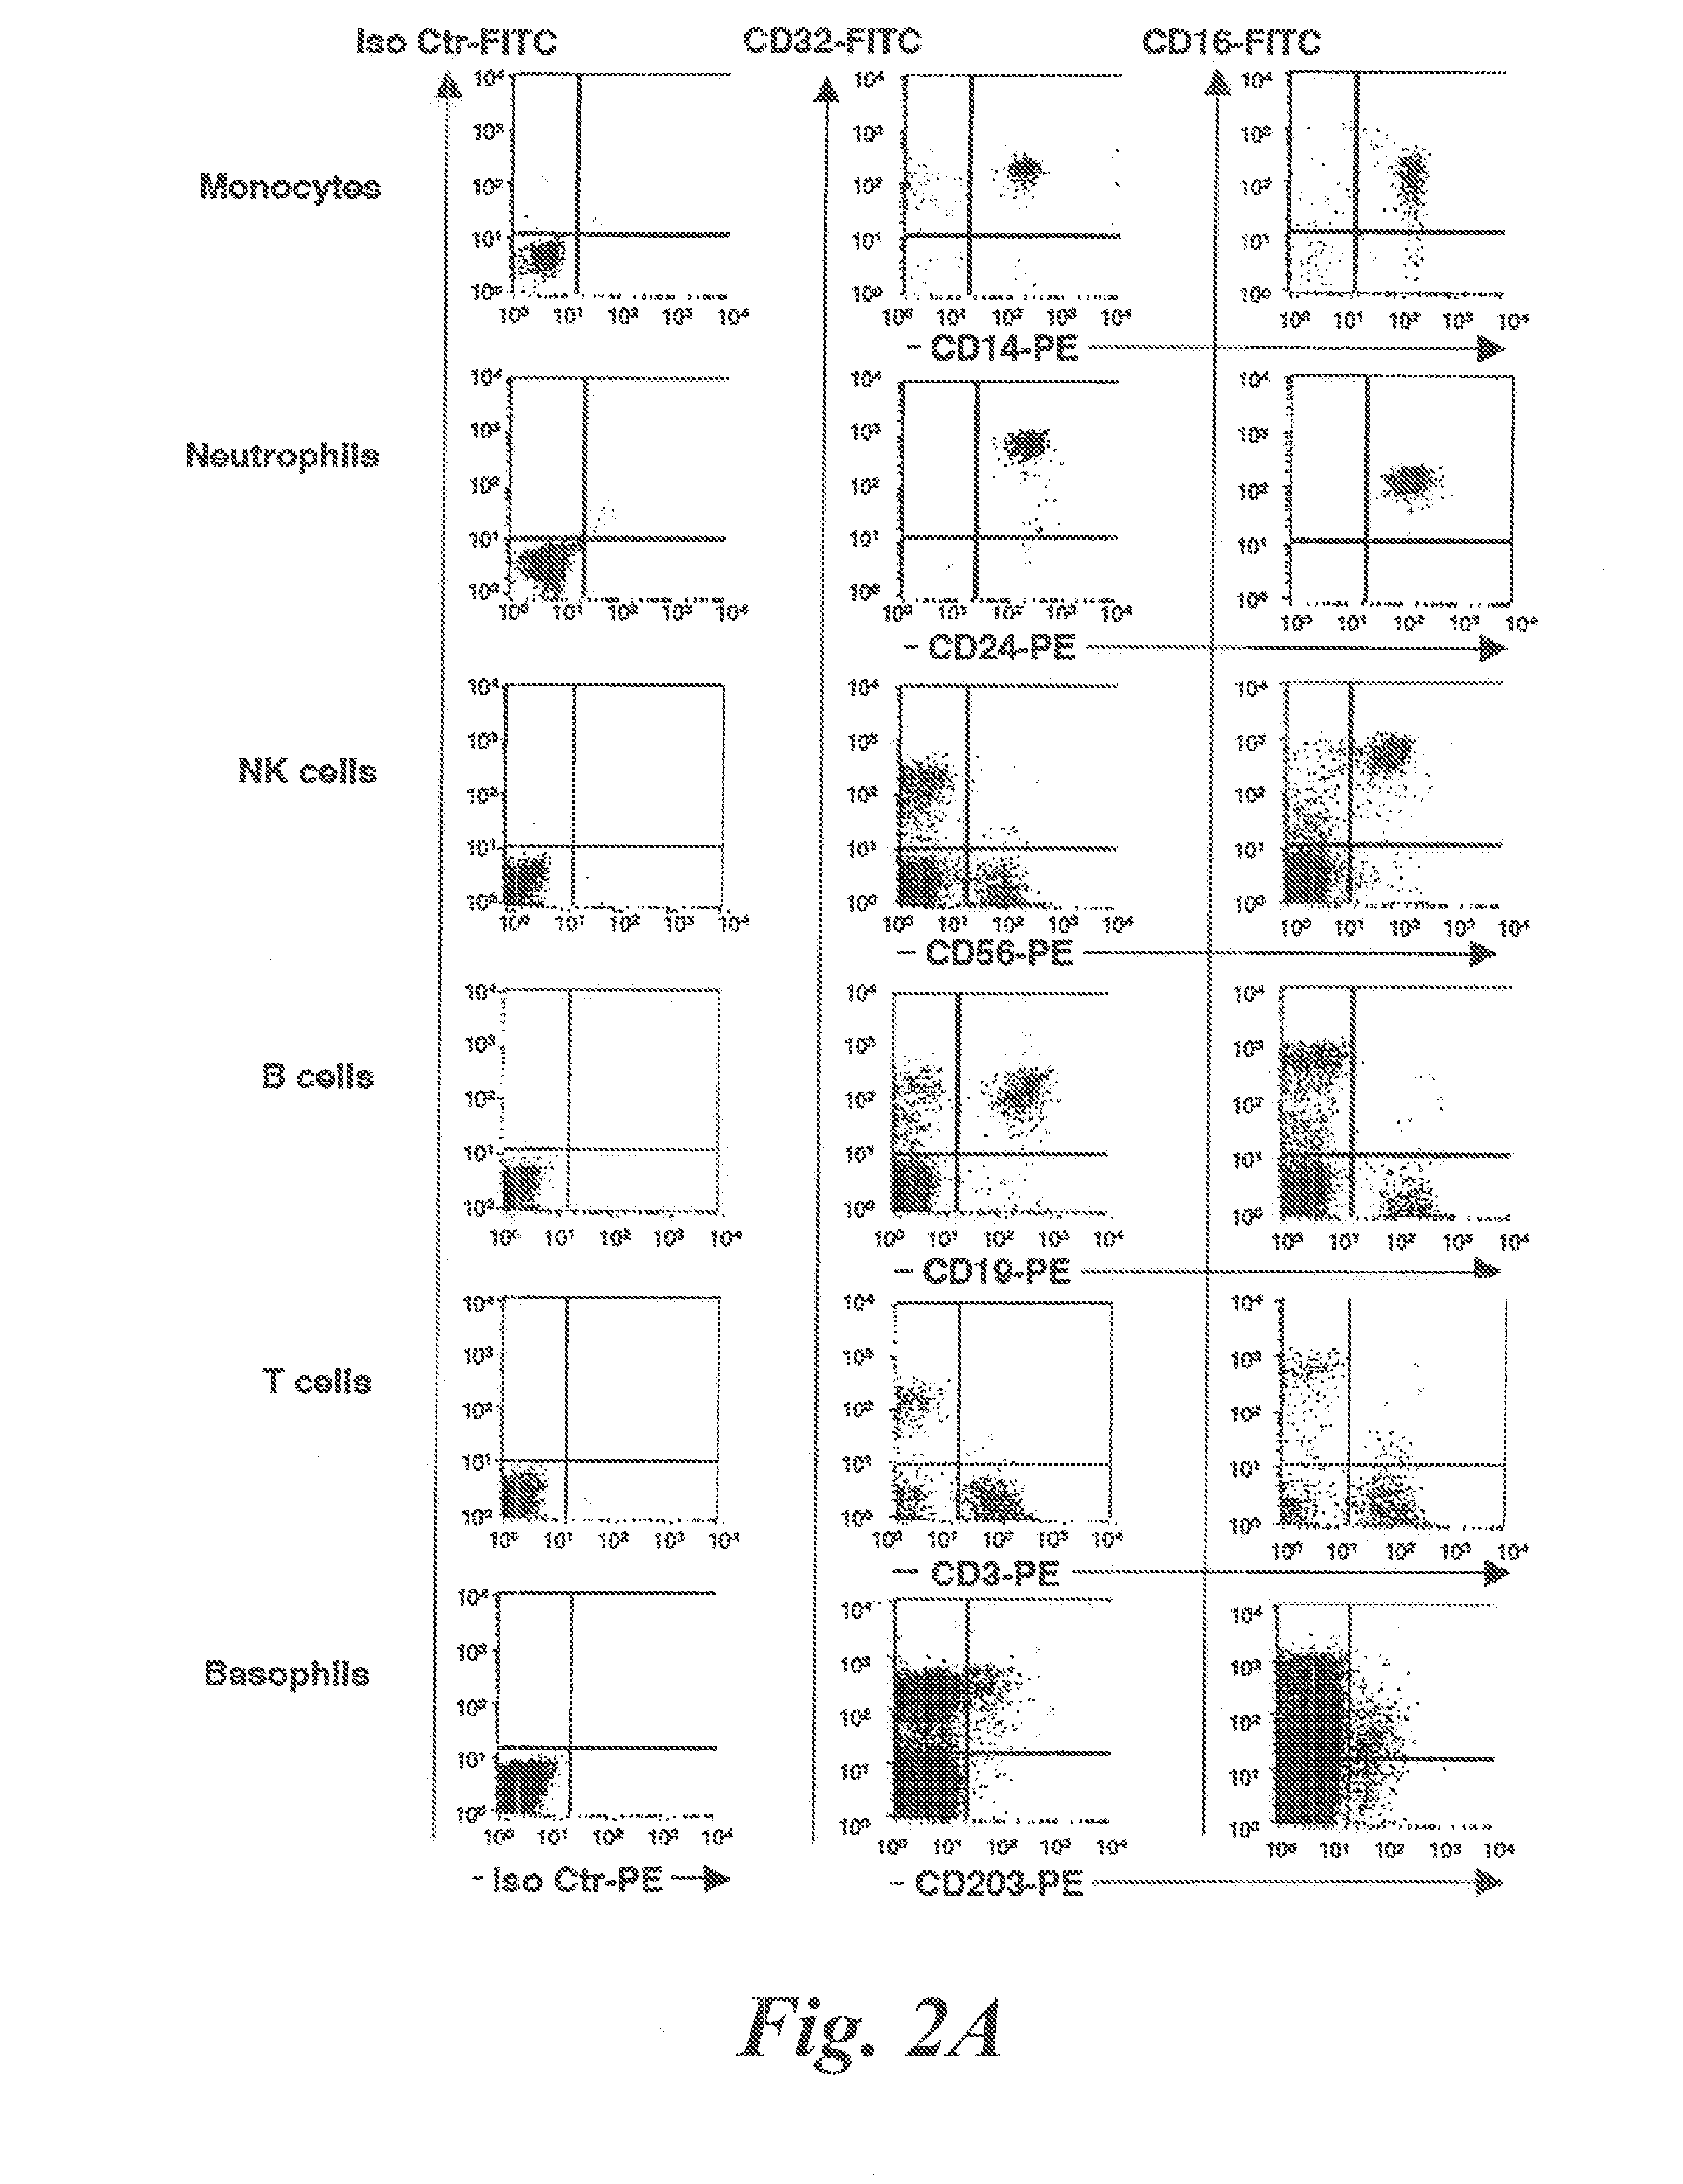 Process for enriching basophils in a blood sample